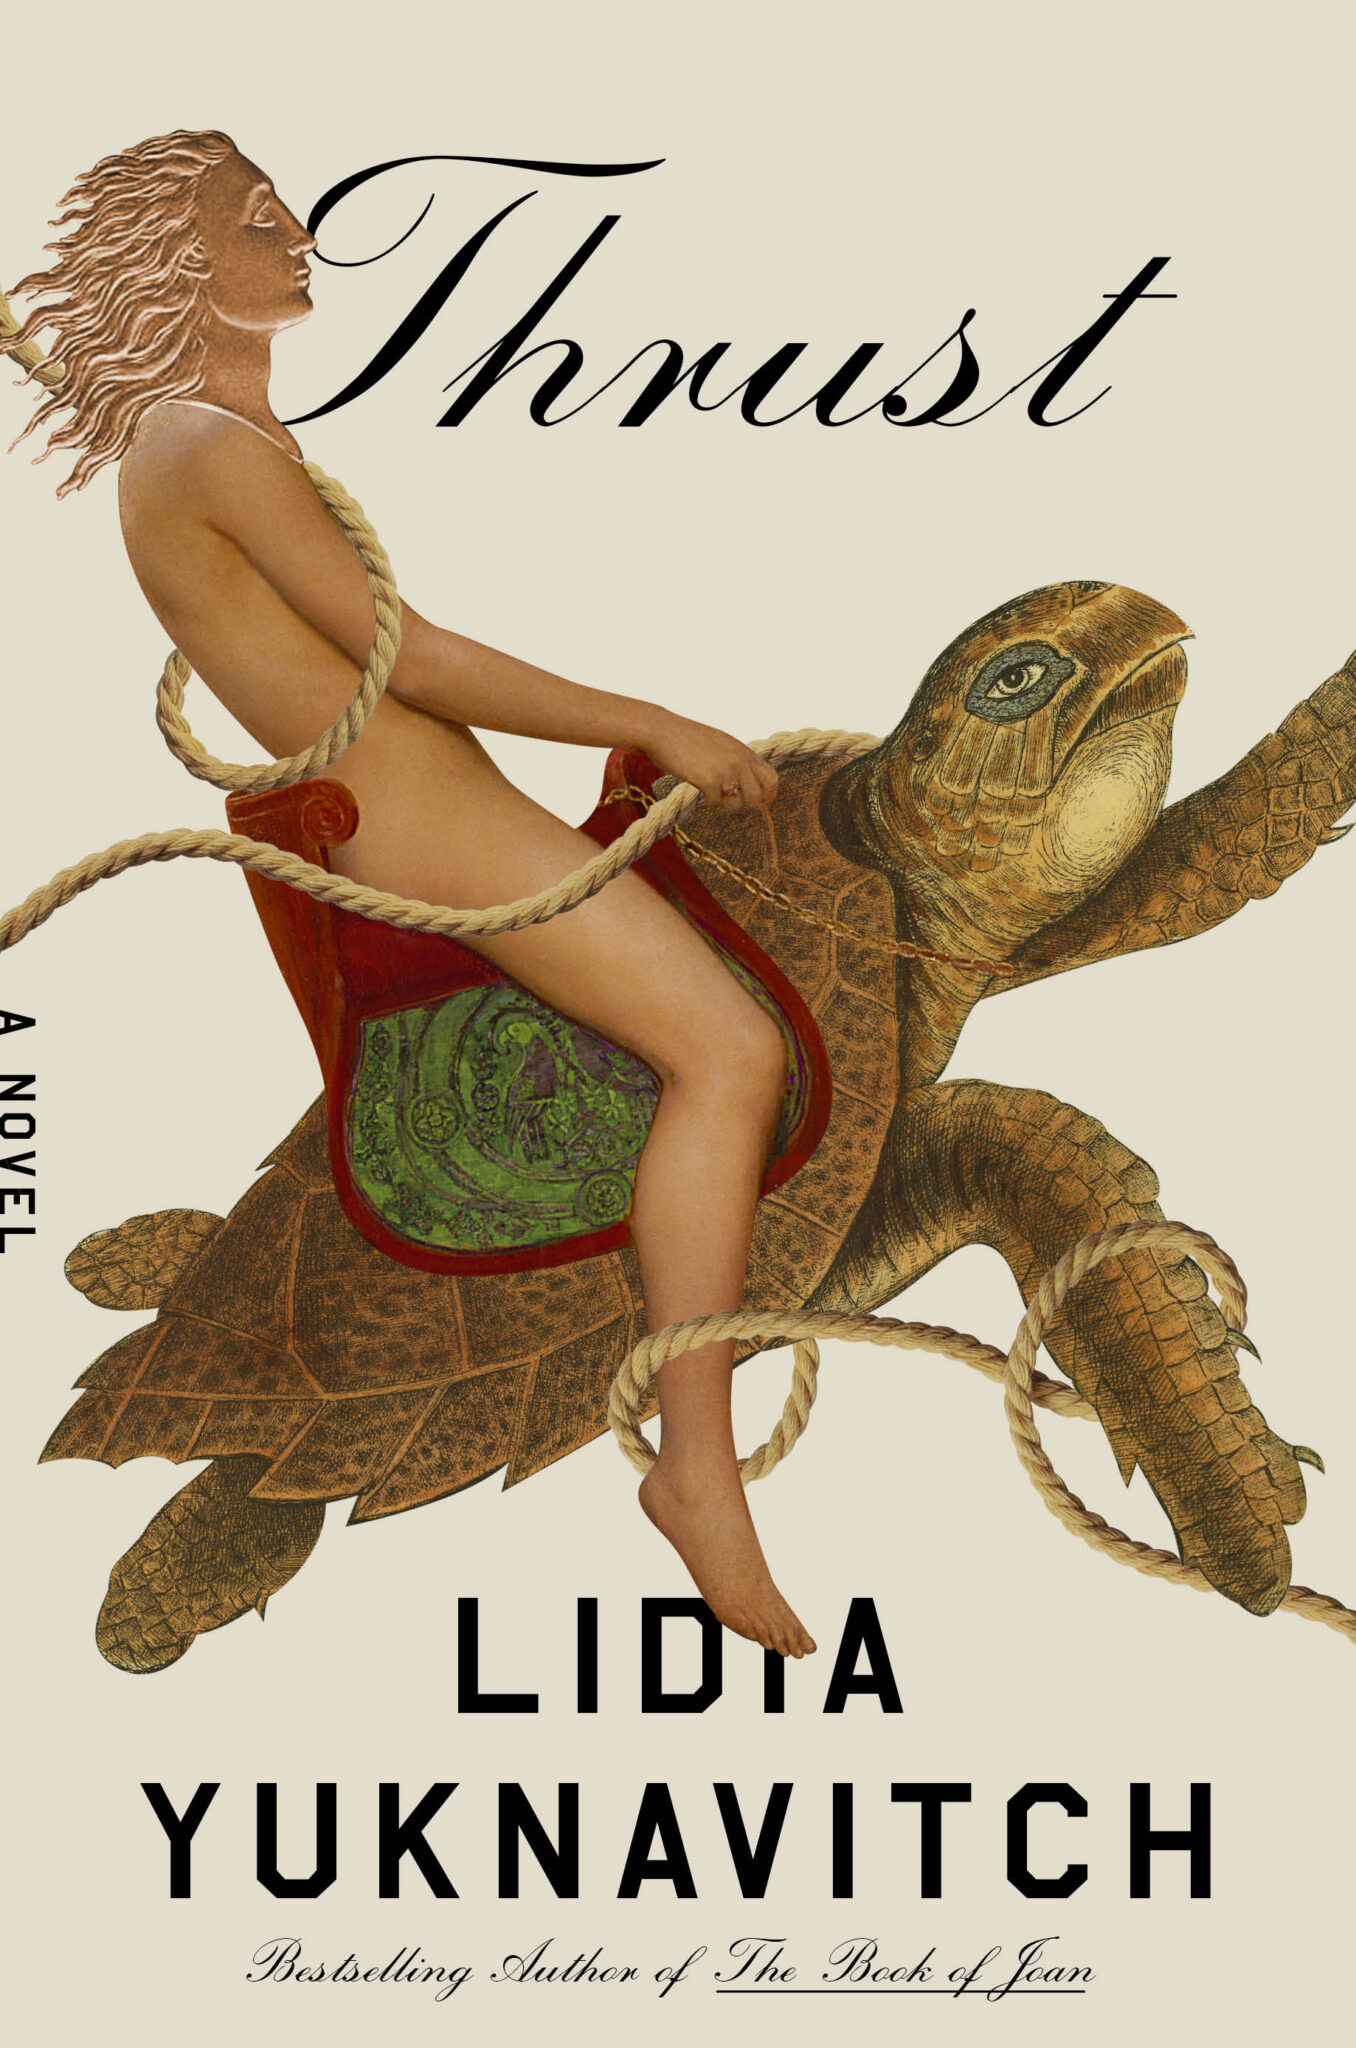 Book Cover Image of “Thrust”